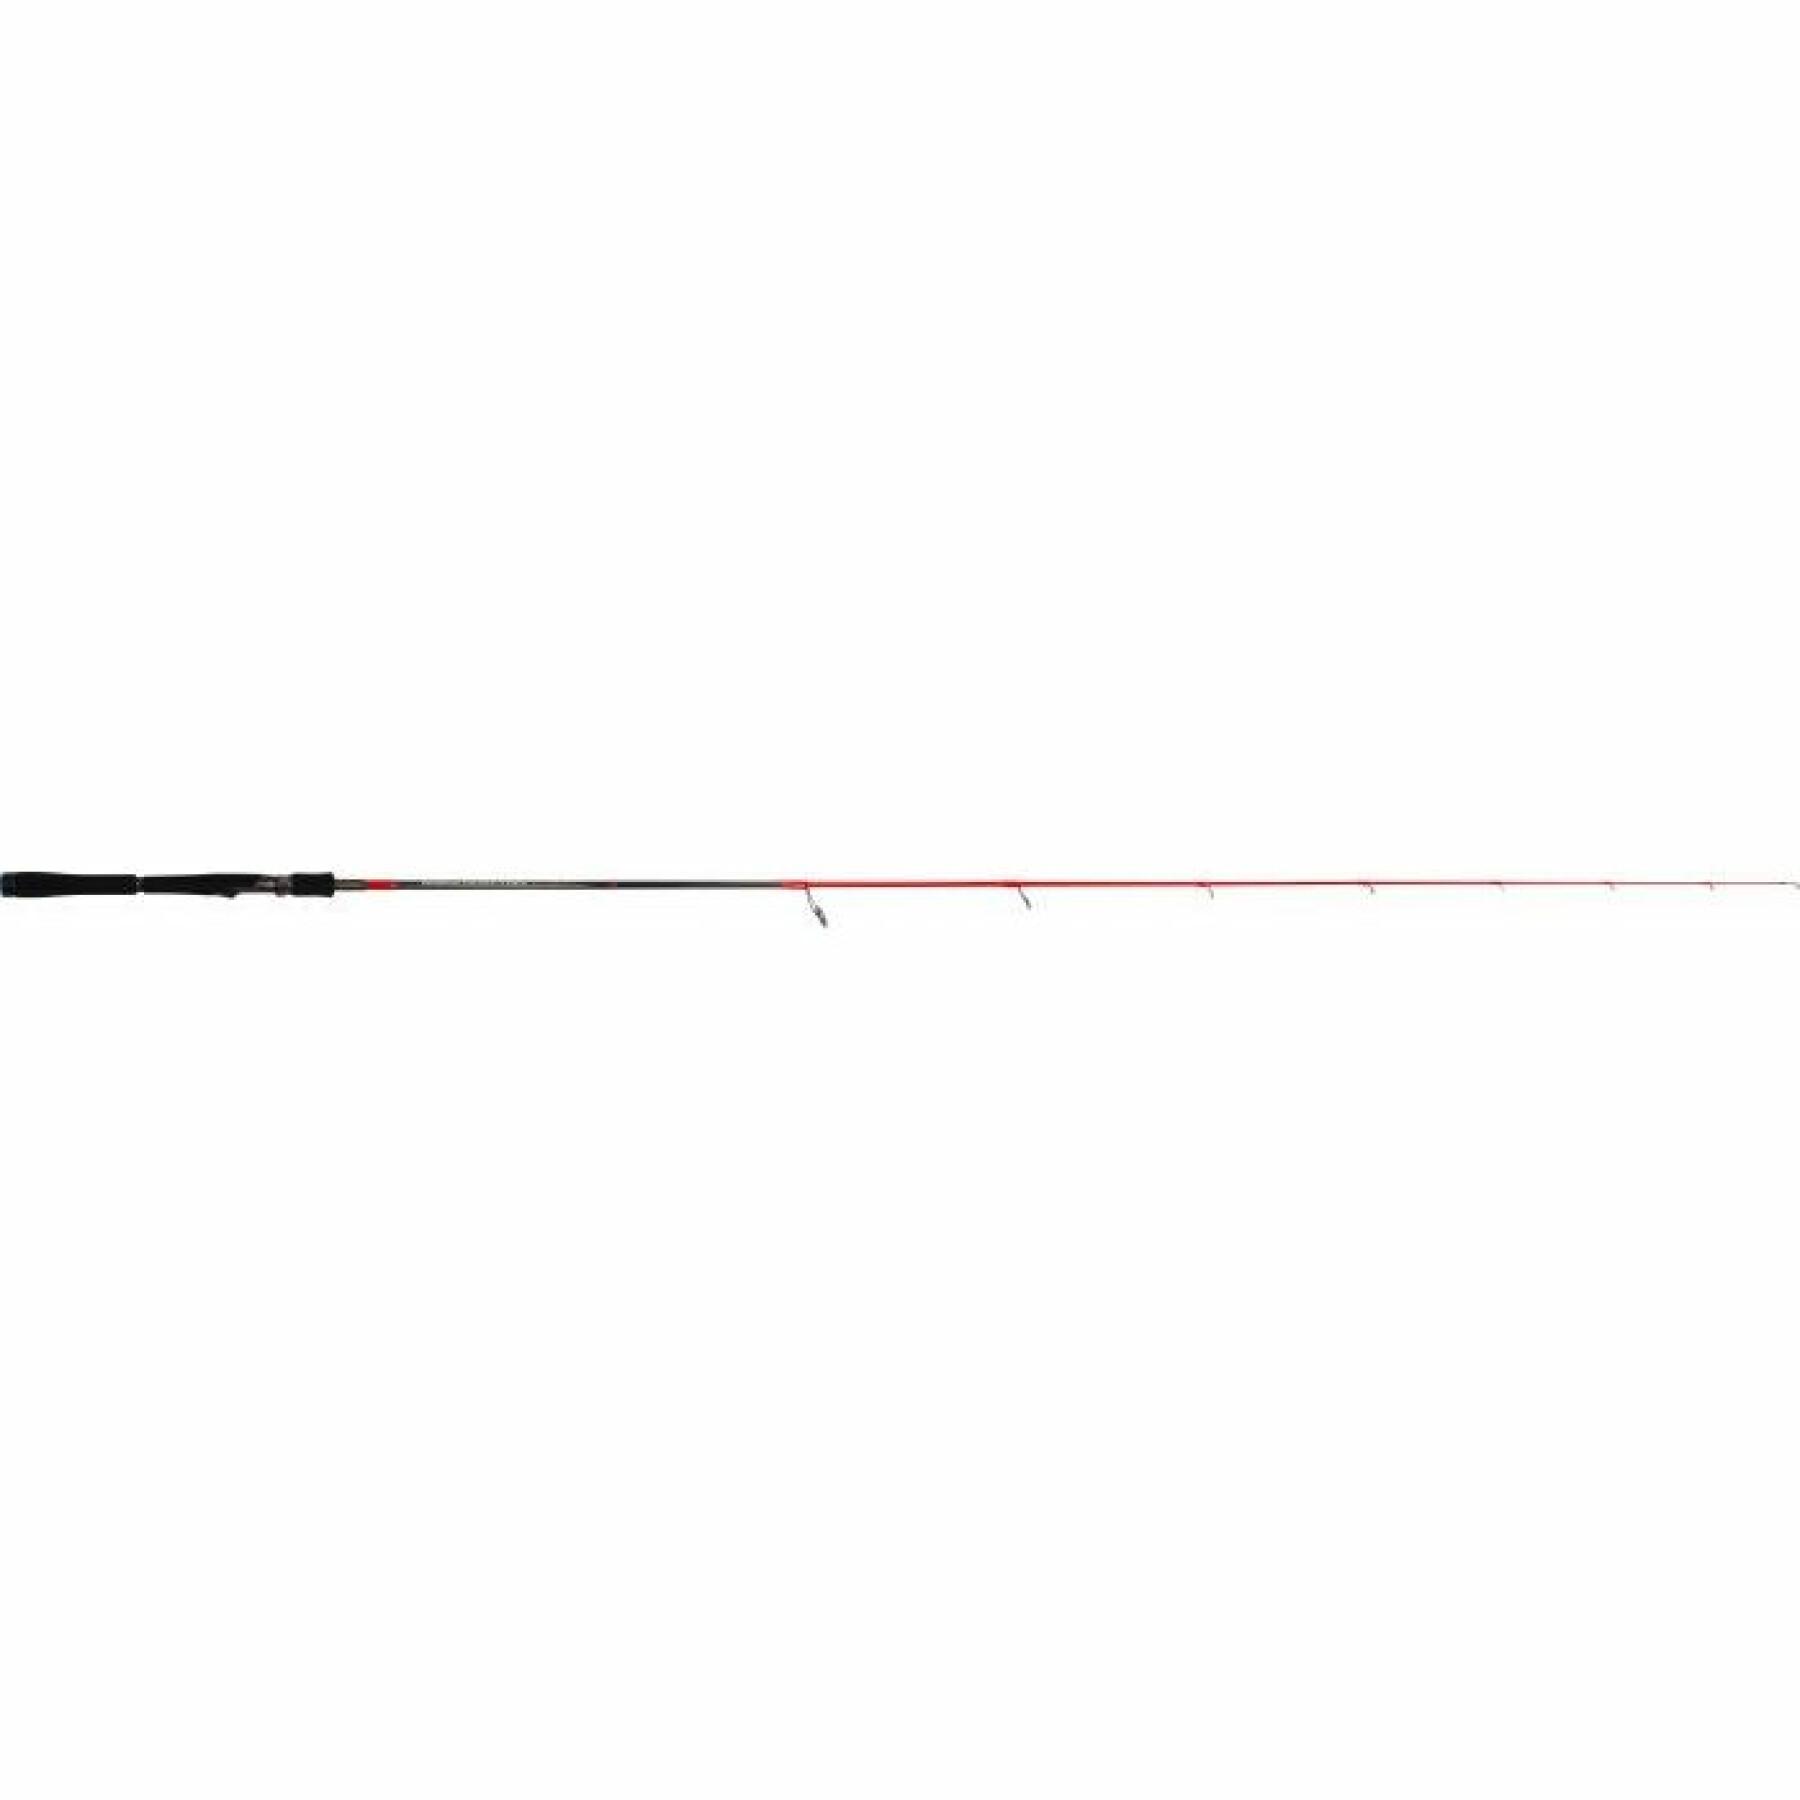 Spinstang Tenryu Injection SP 64ML 3,5-14g